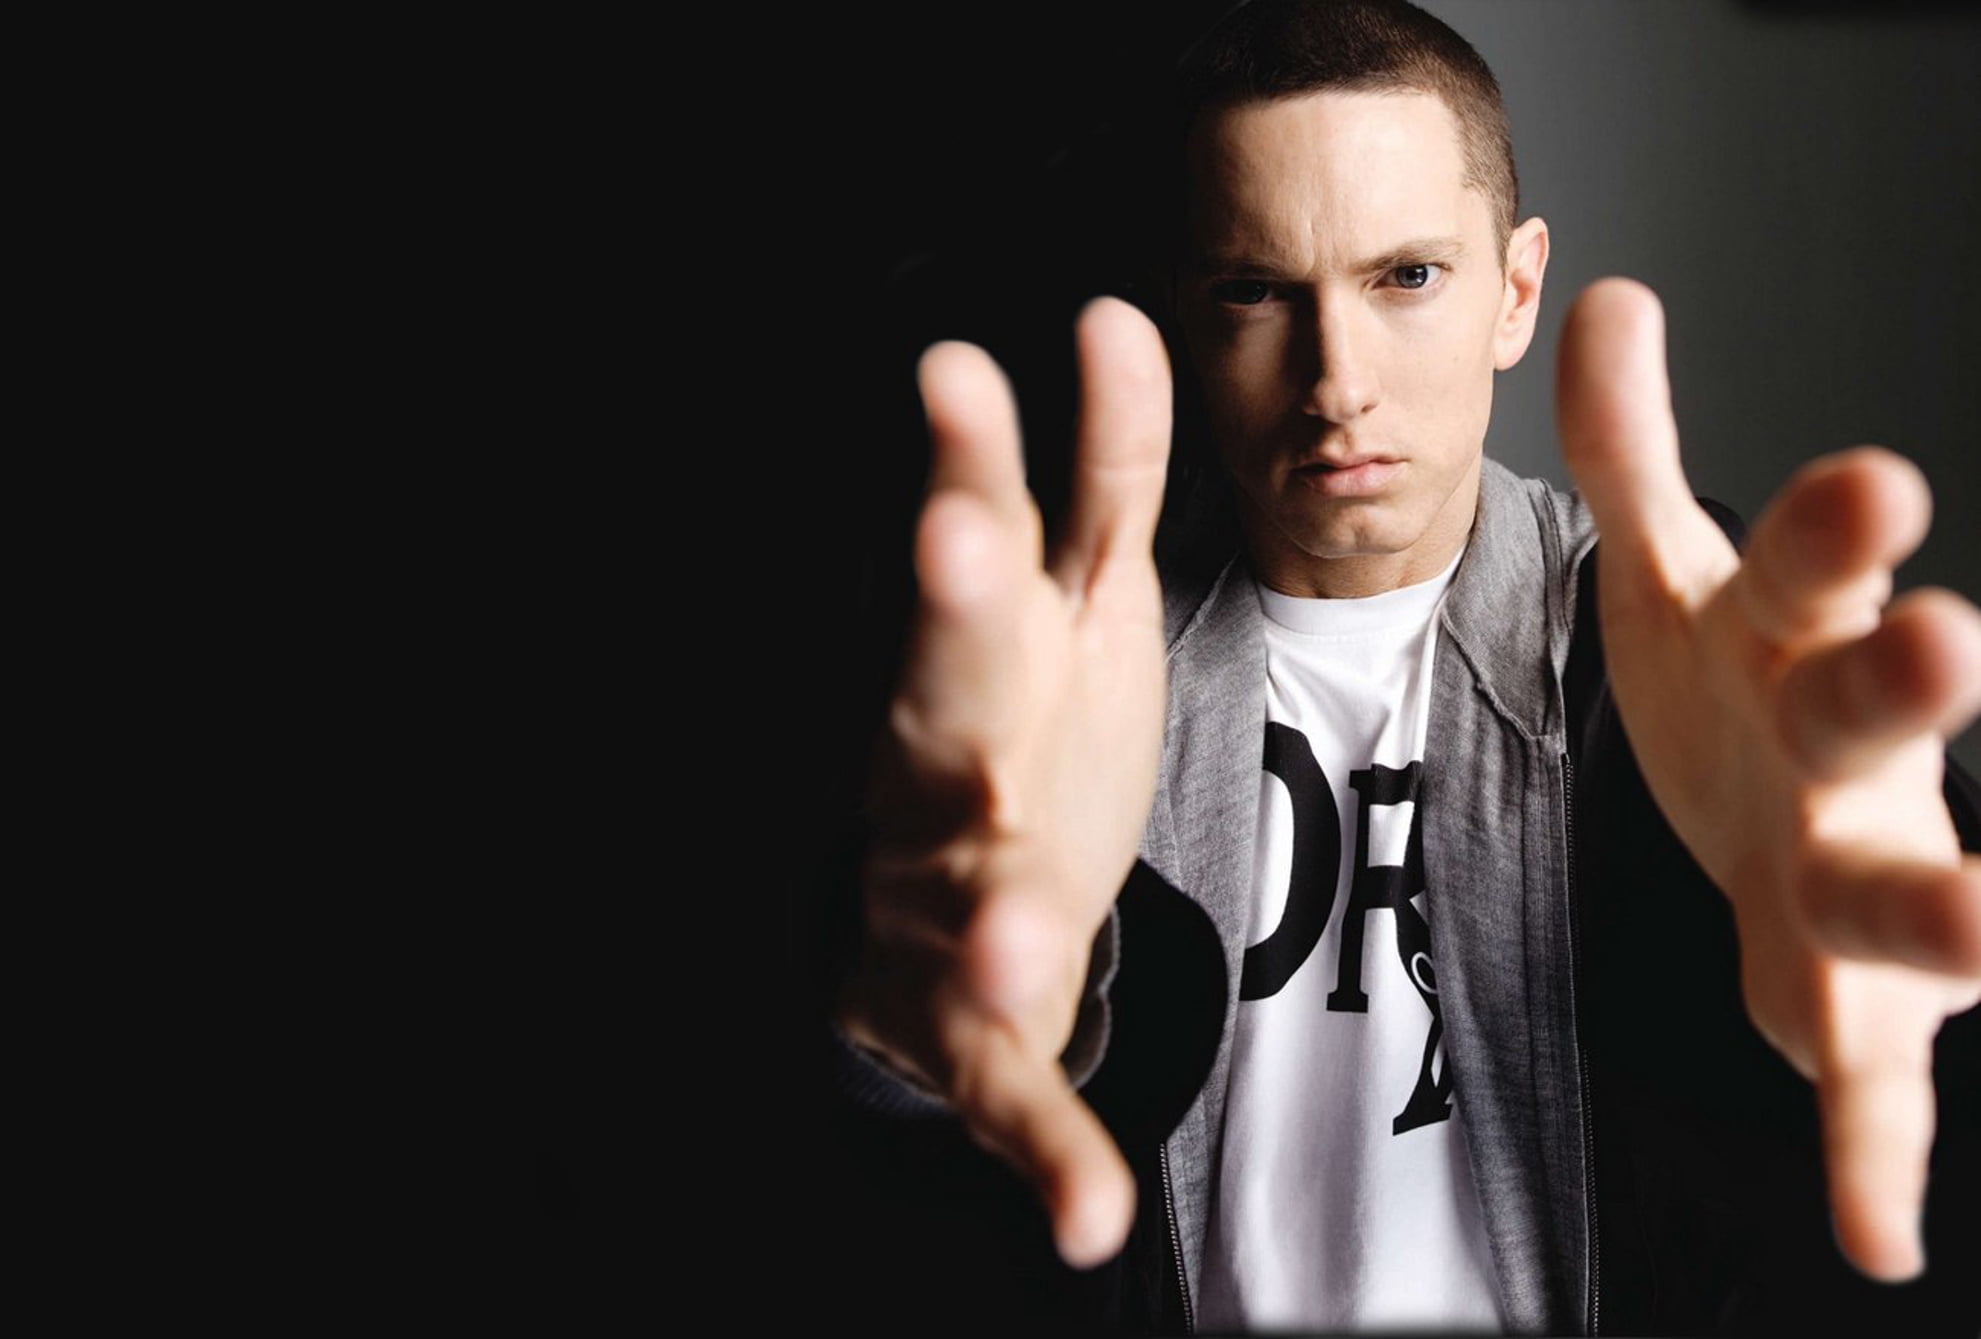 Eminem, actor, male, singer, rap, gesturing, aggression, one person